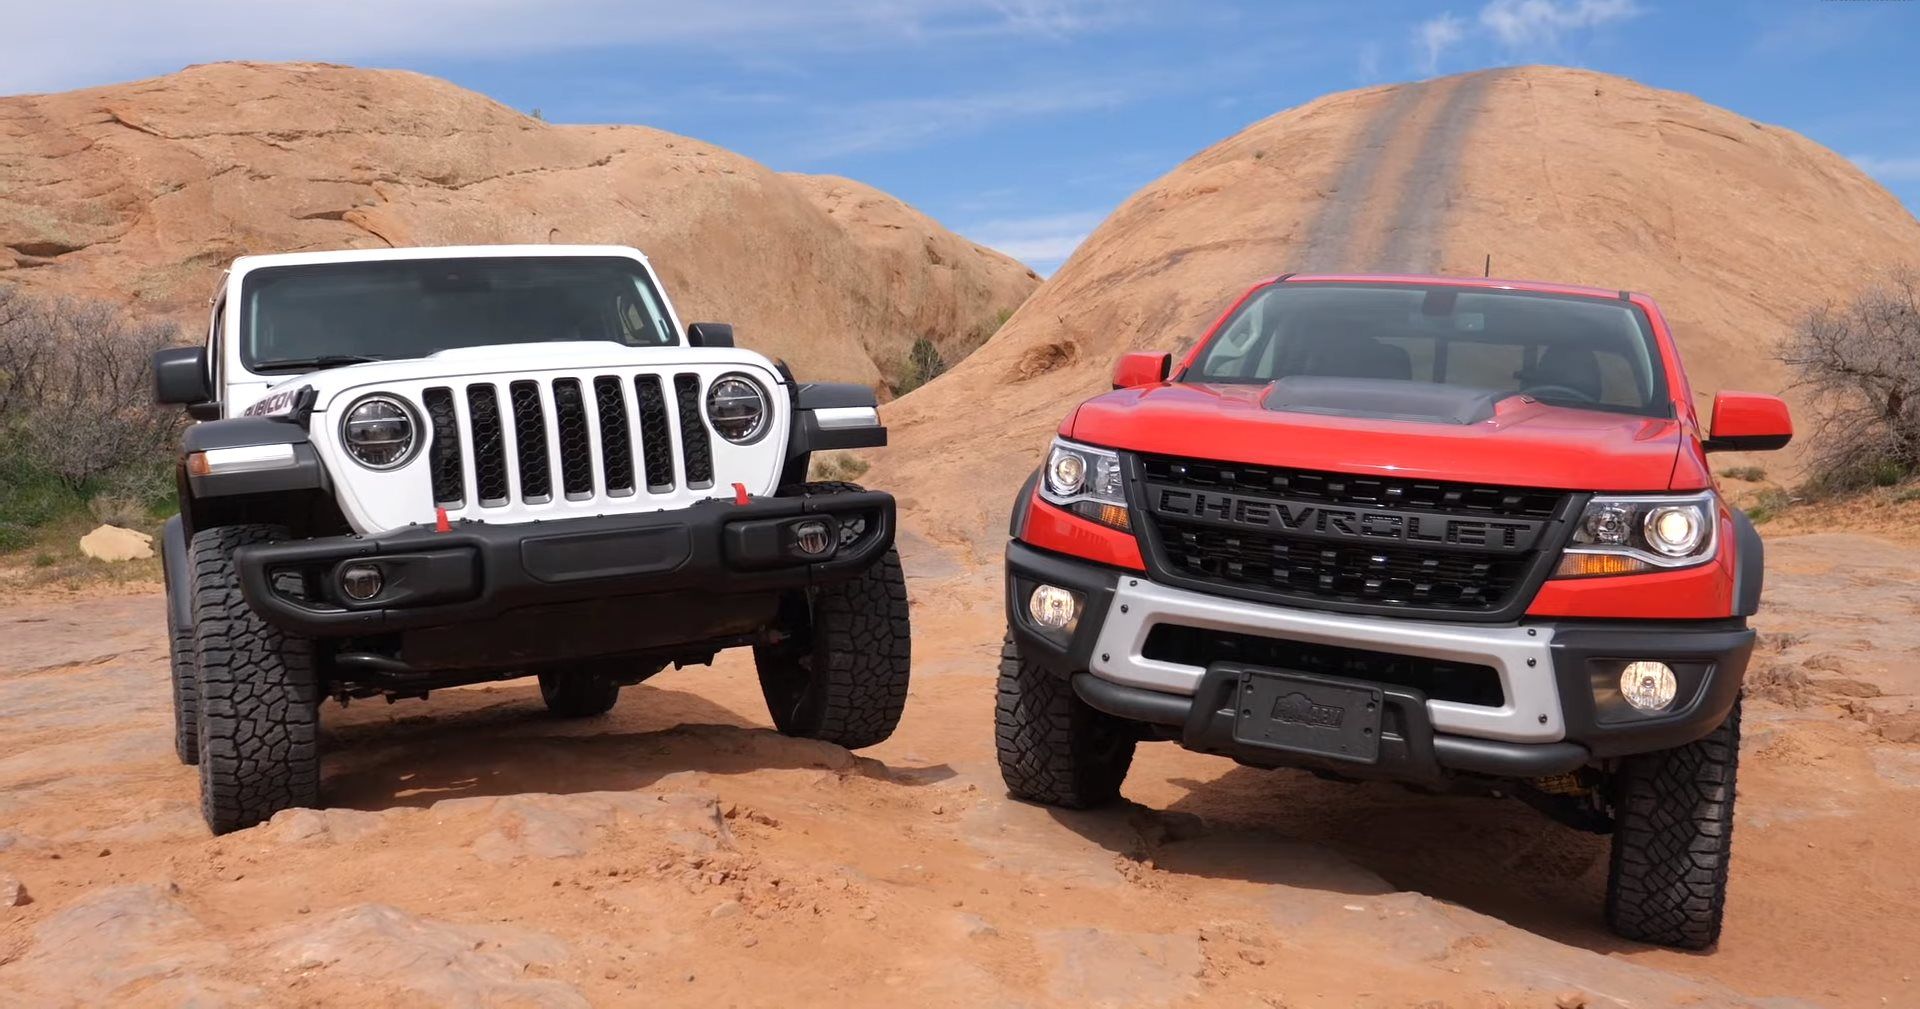 New Jeep Gladiator Takes On The Chevy ZR2 Bison For Off-Road Supremacy